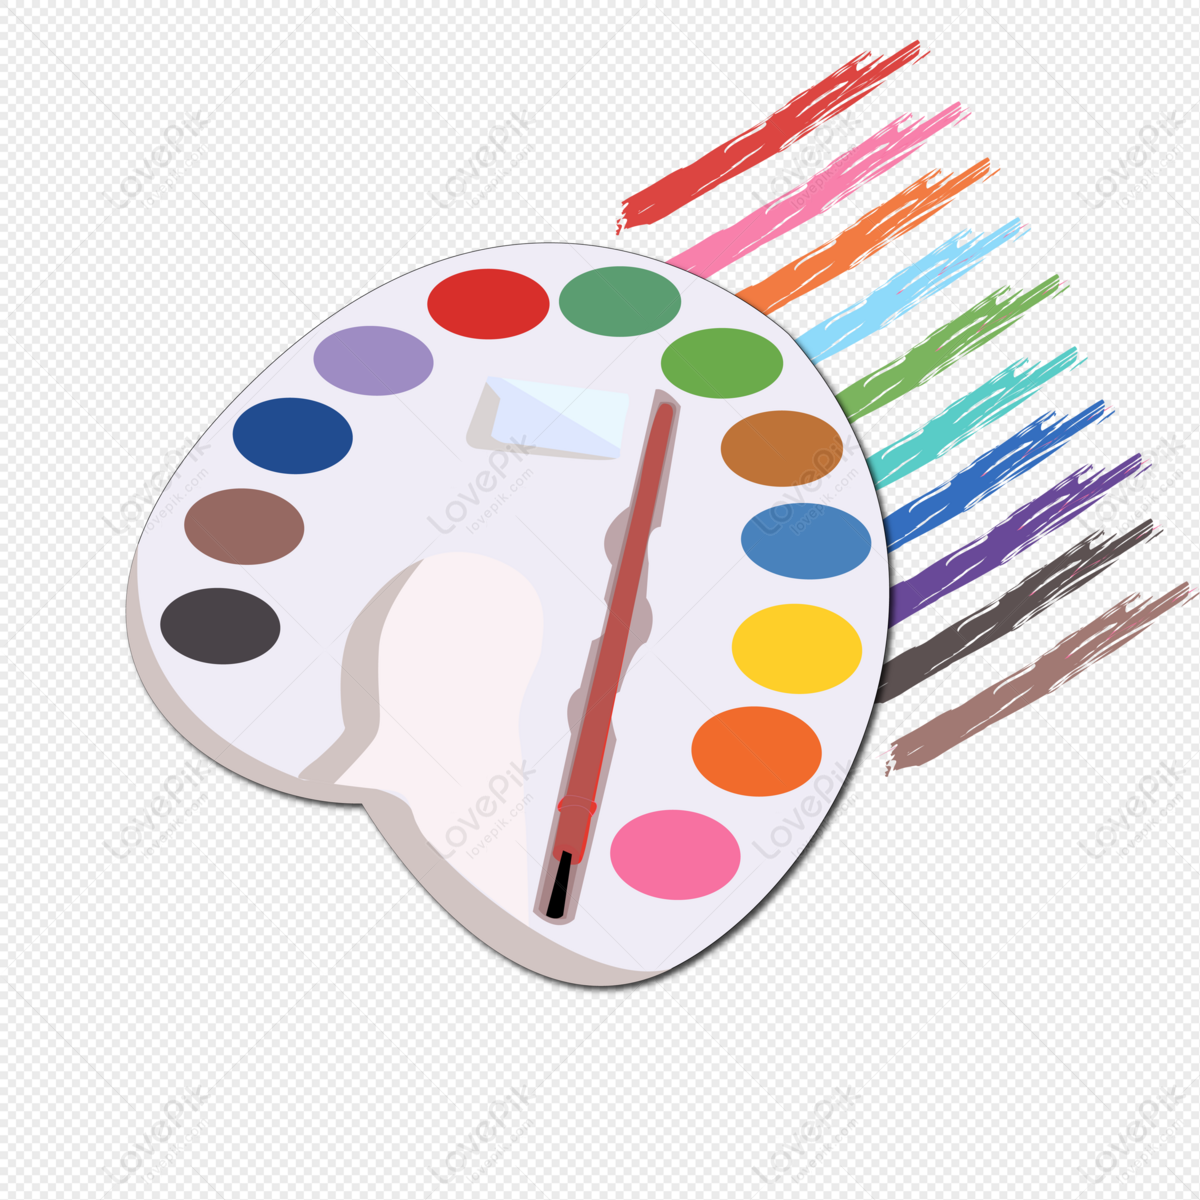 Painting Plate Vector Hd PNG Images, Color Painting Plate Material, Color,  Videos Plate, Material PNG Image For Free Download